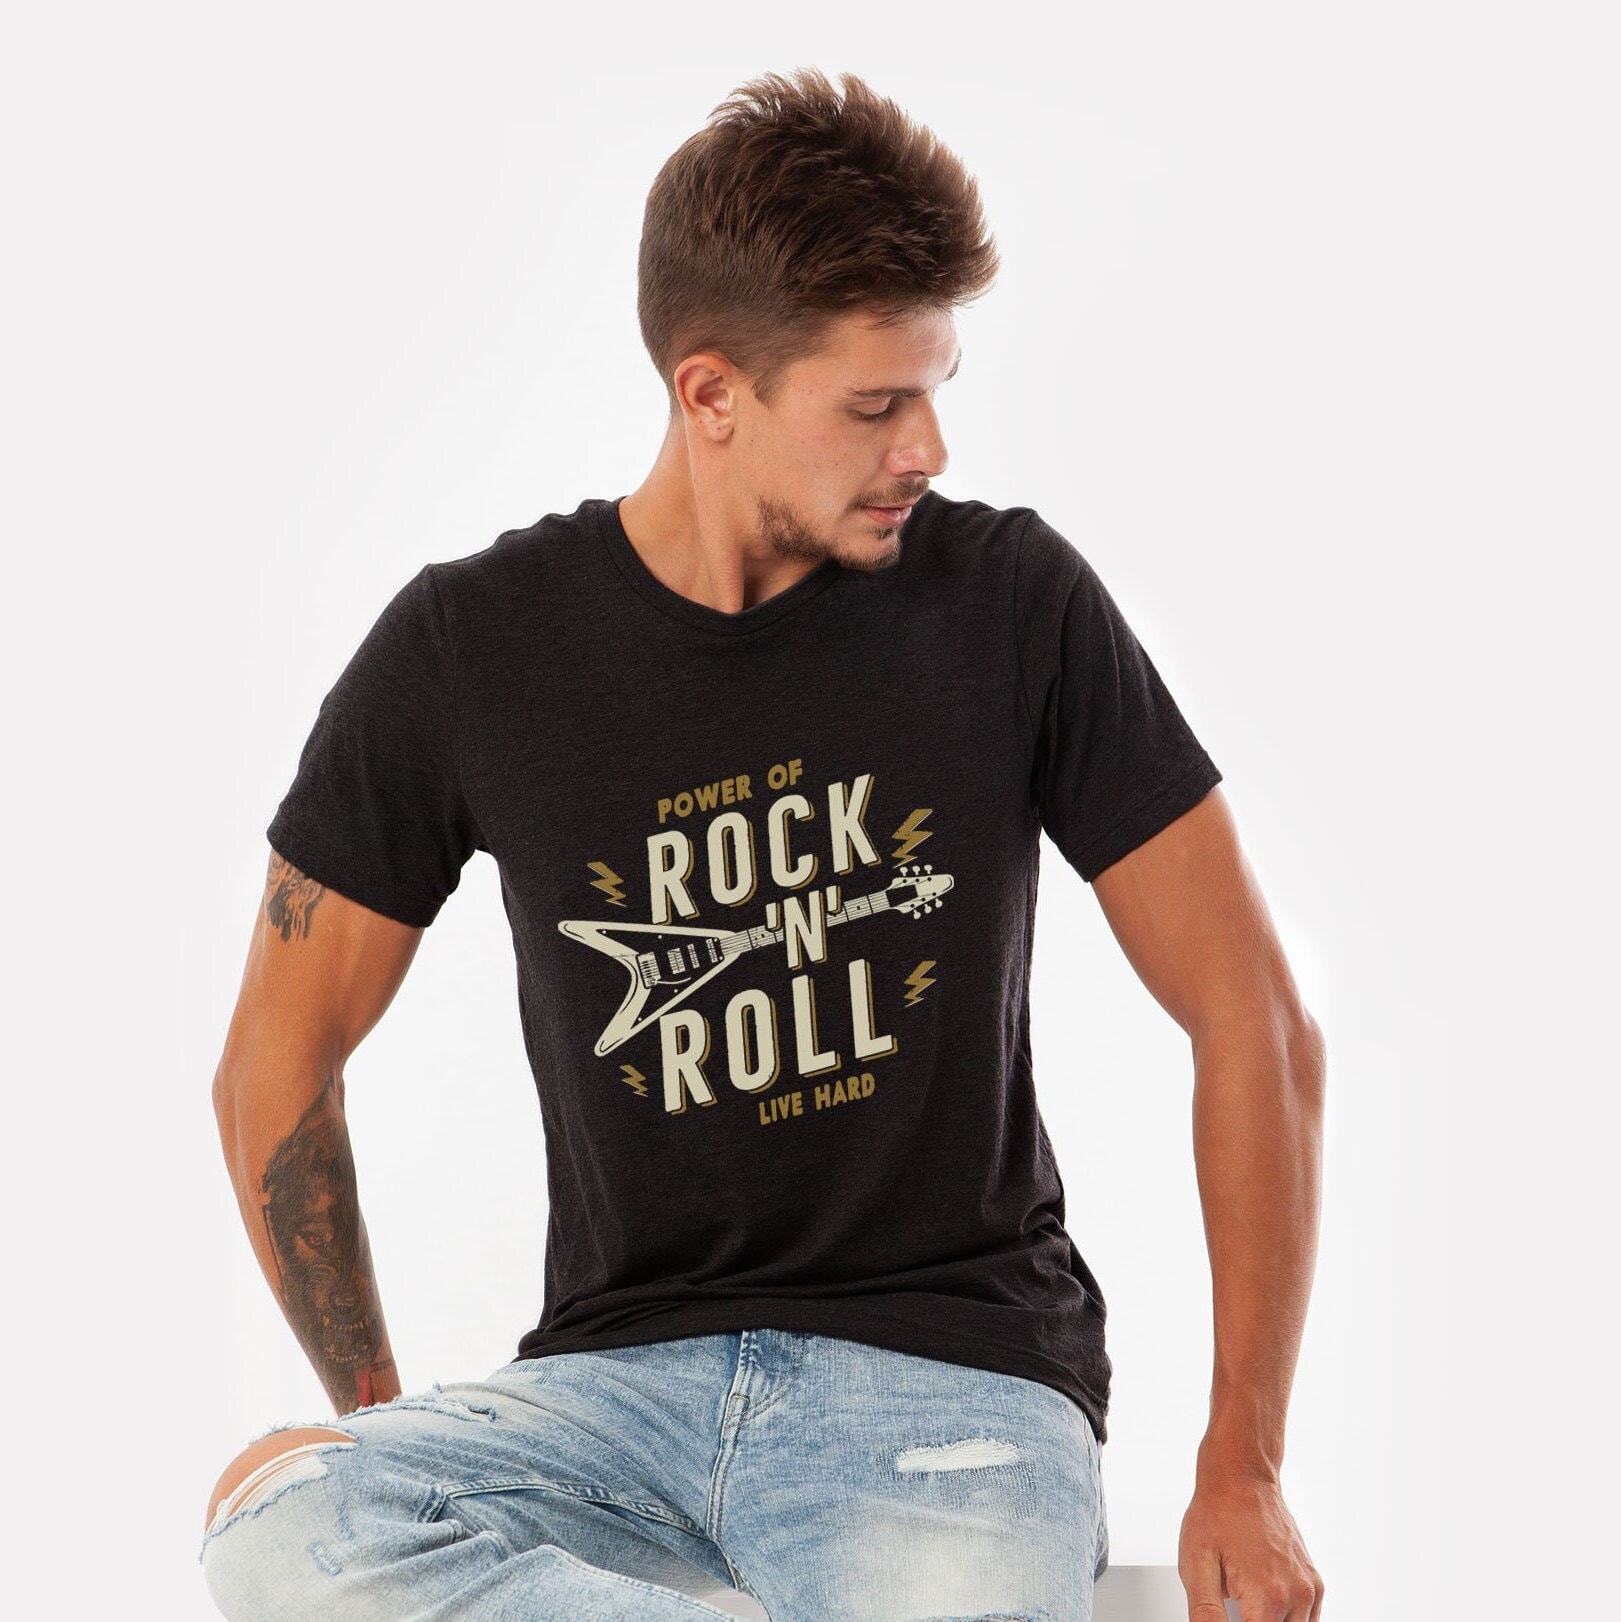 Discover Music Shirt, Vintage Style Rock and Roll Shirt, Rock N Roll T-shirt